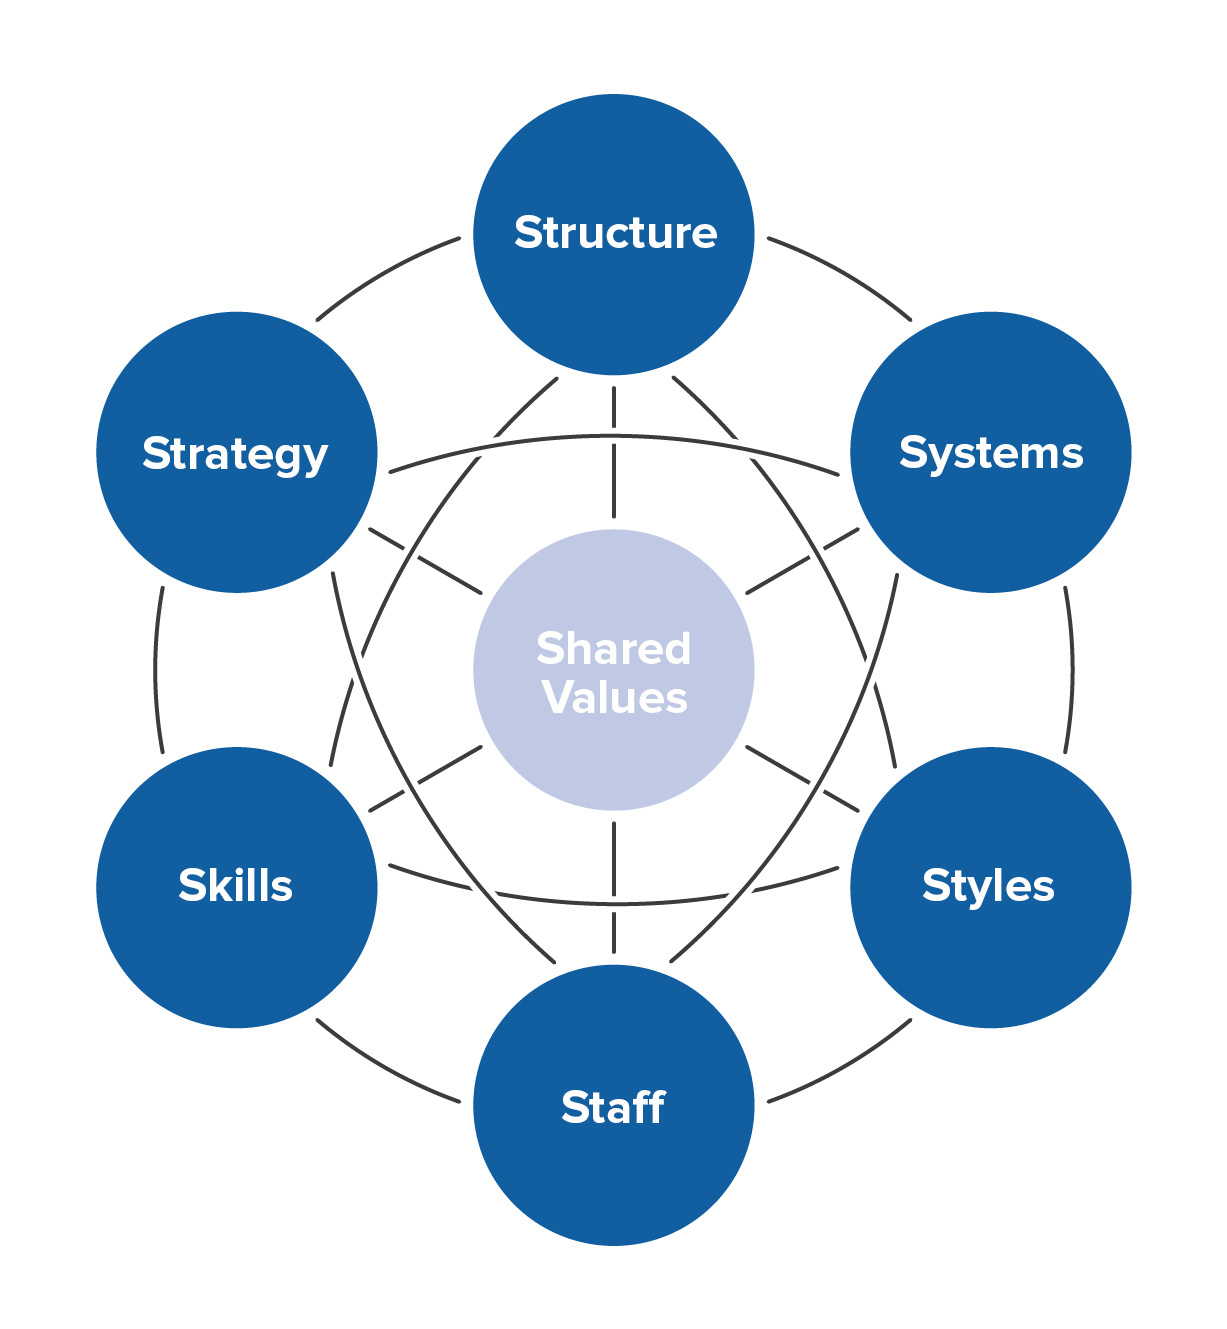 the mckinsey 7s framework strategy skills from mindtools com the mckinsey 7s framework strategy